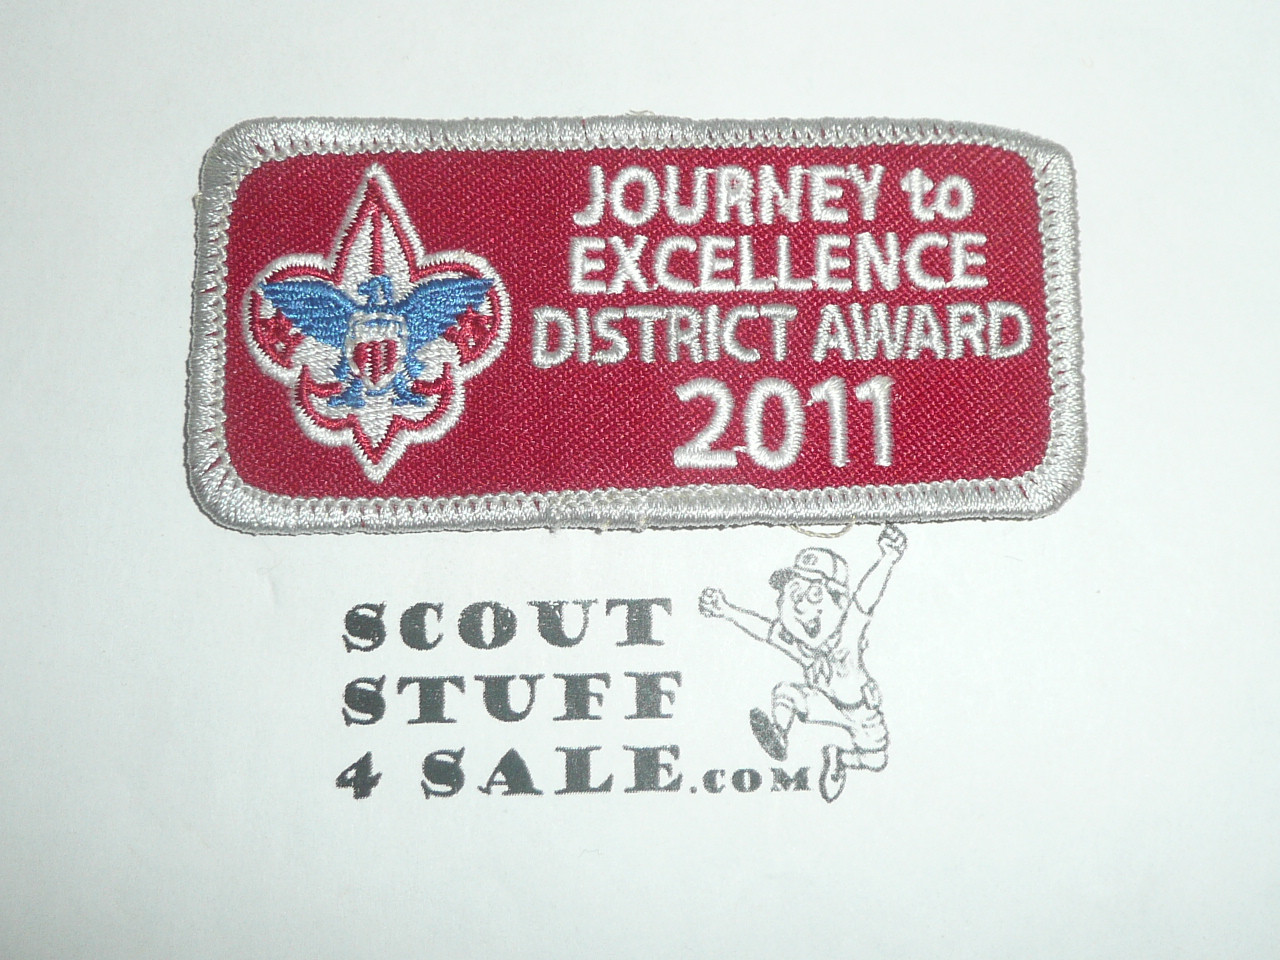 Journey to Excellence Quality District Award Patch, 2011